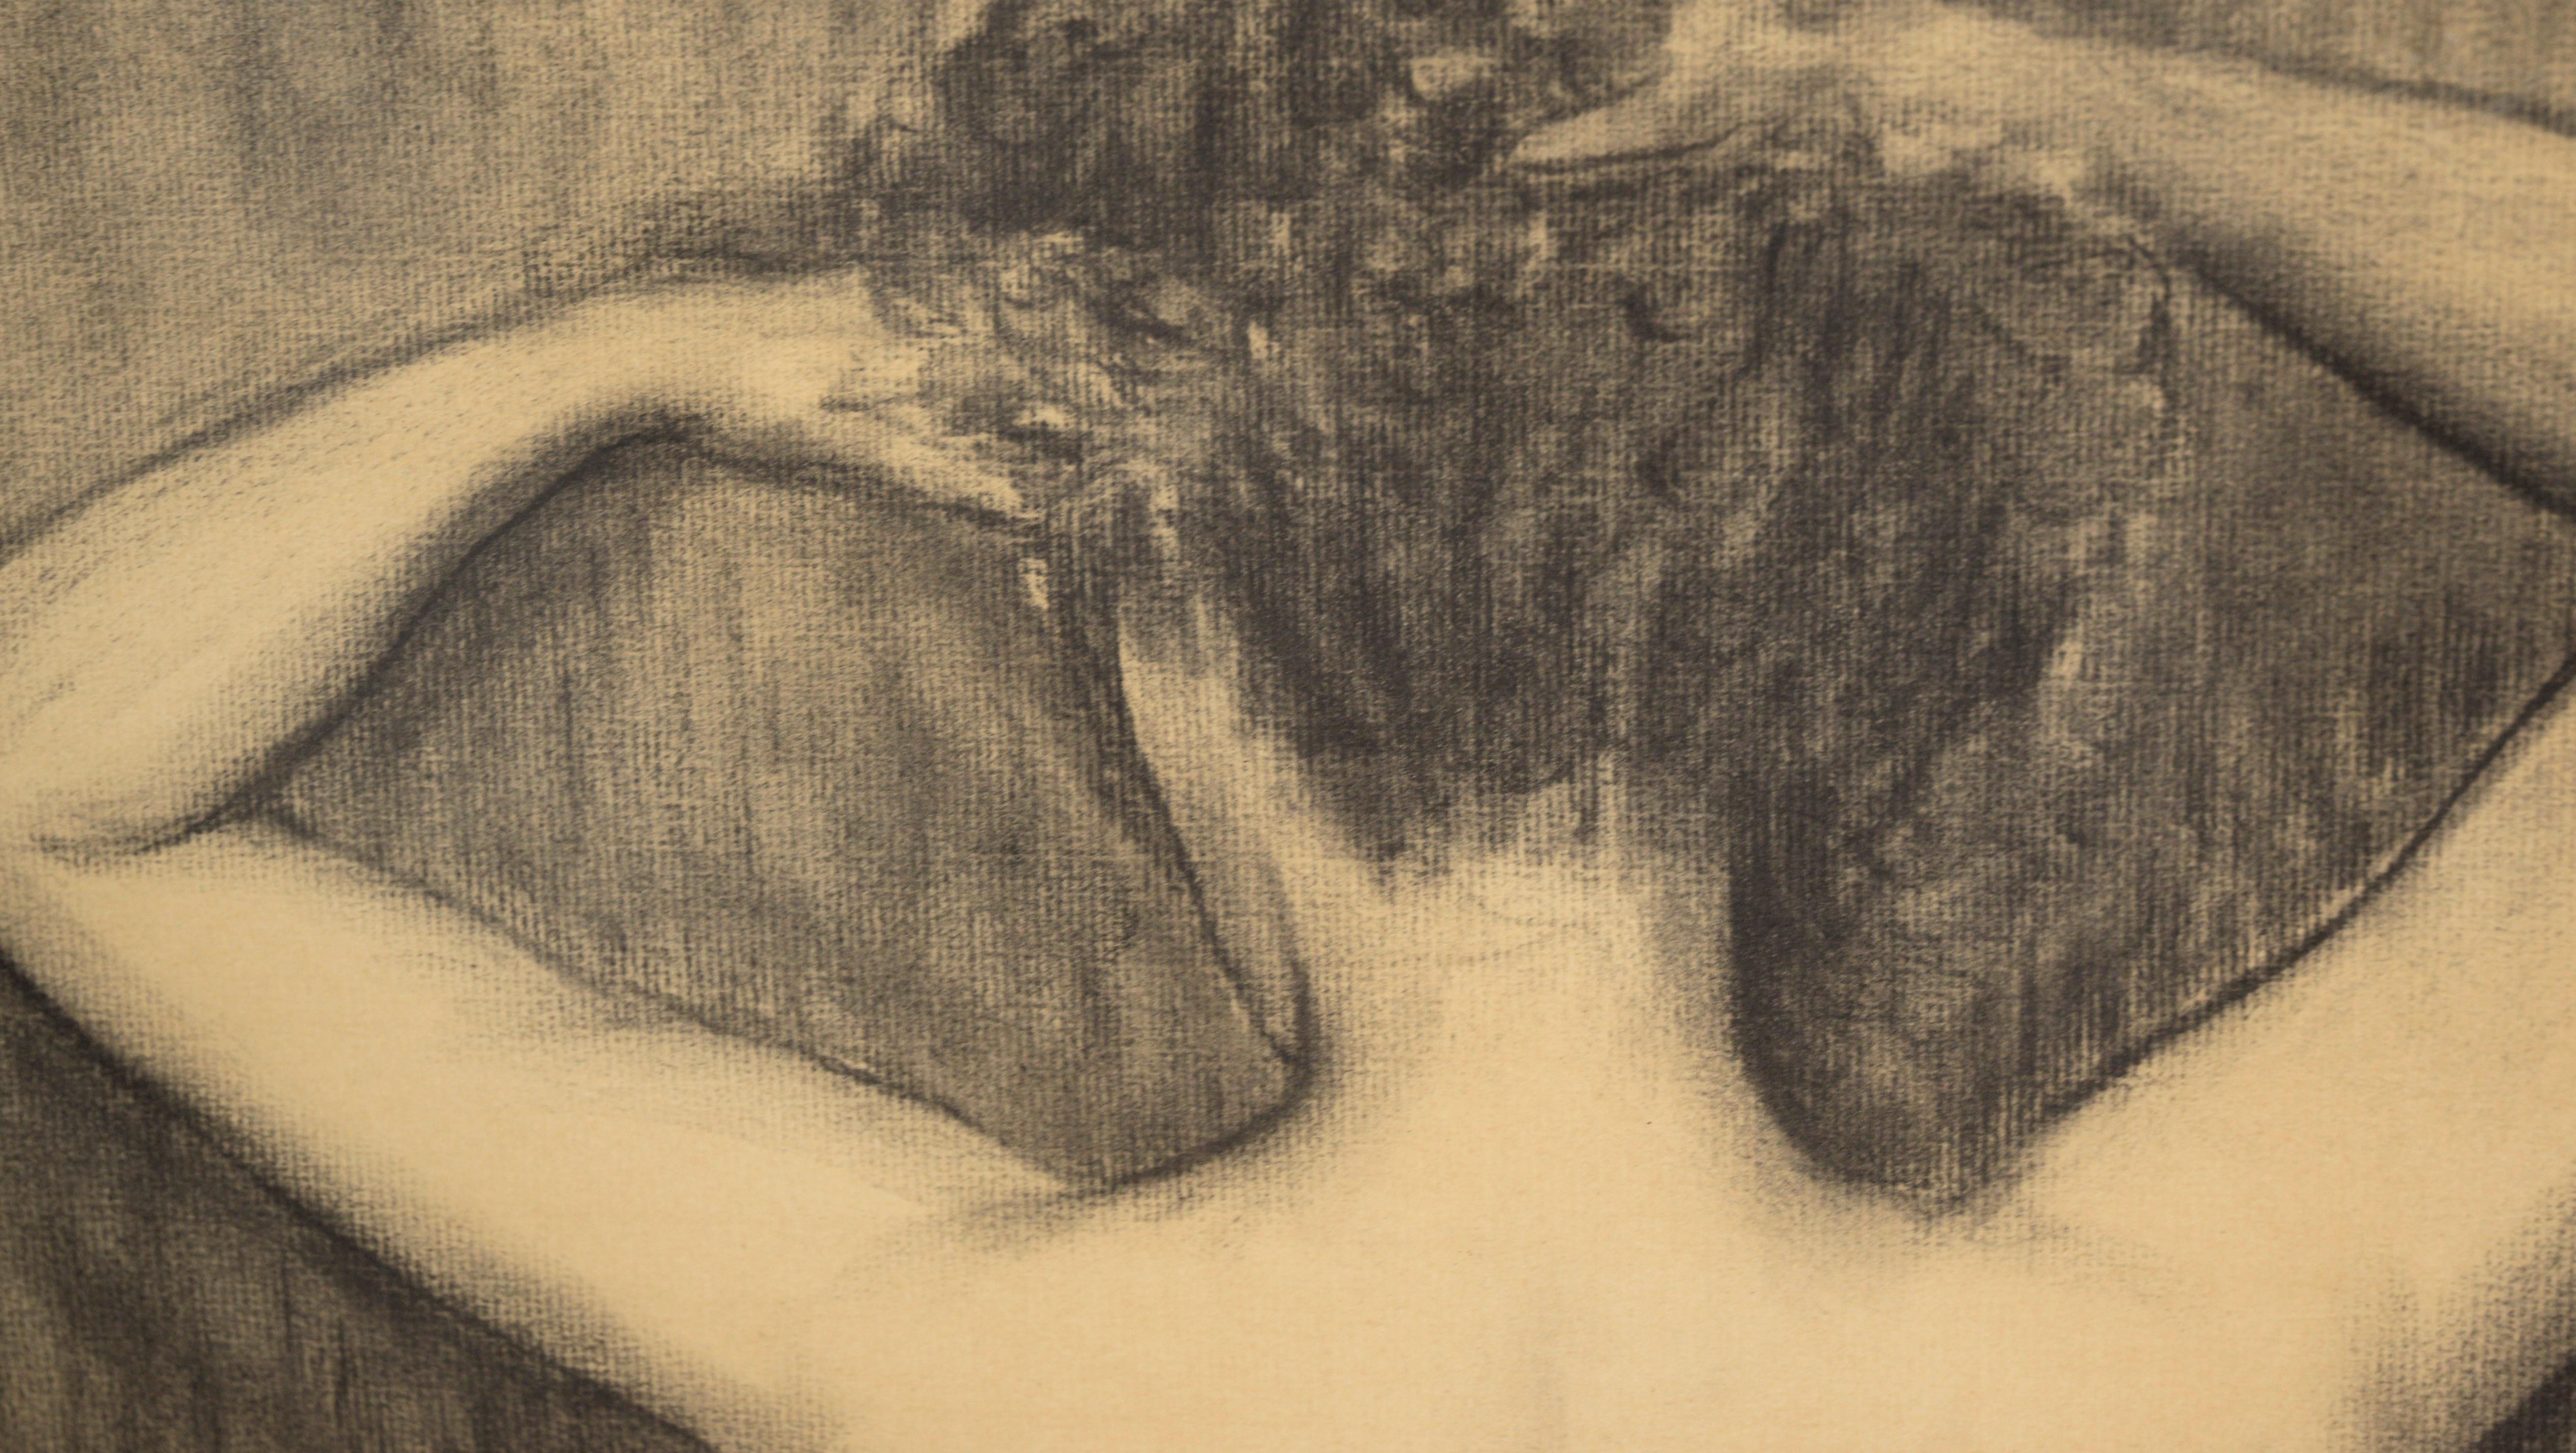 Elegant depiction of a nude woman from behind by American artist Bayless (20th Century). The model's hands are raised, adjusting her hair, and the artist has captured the twisting and flexing of her musculature. Shading is used sparingly on the